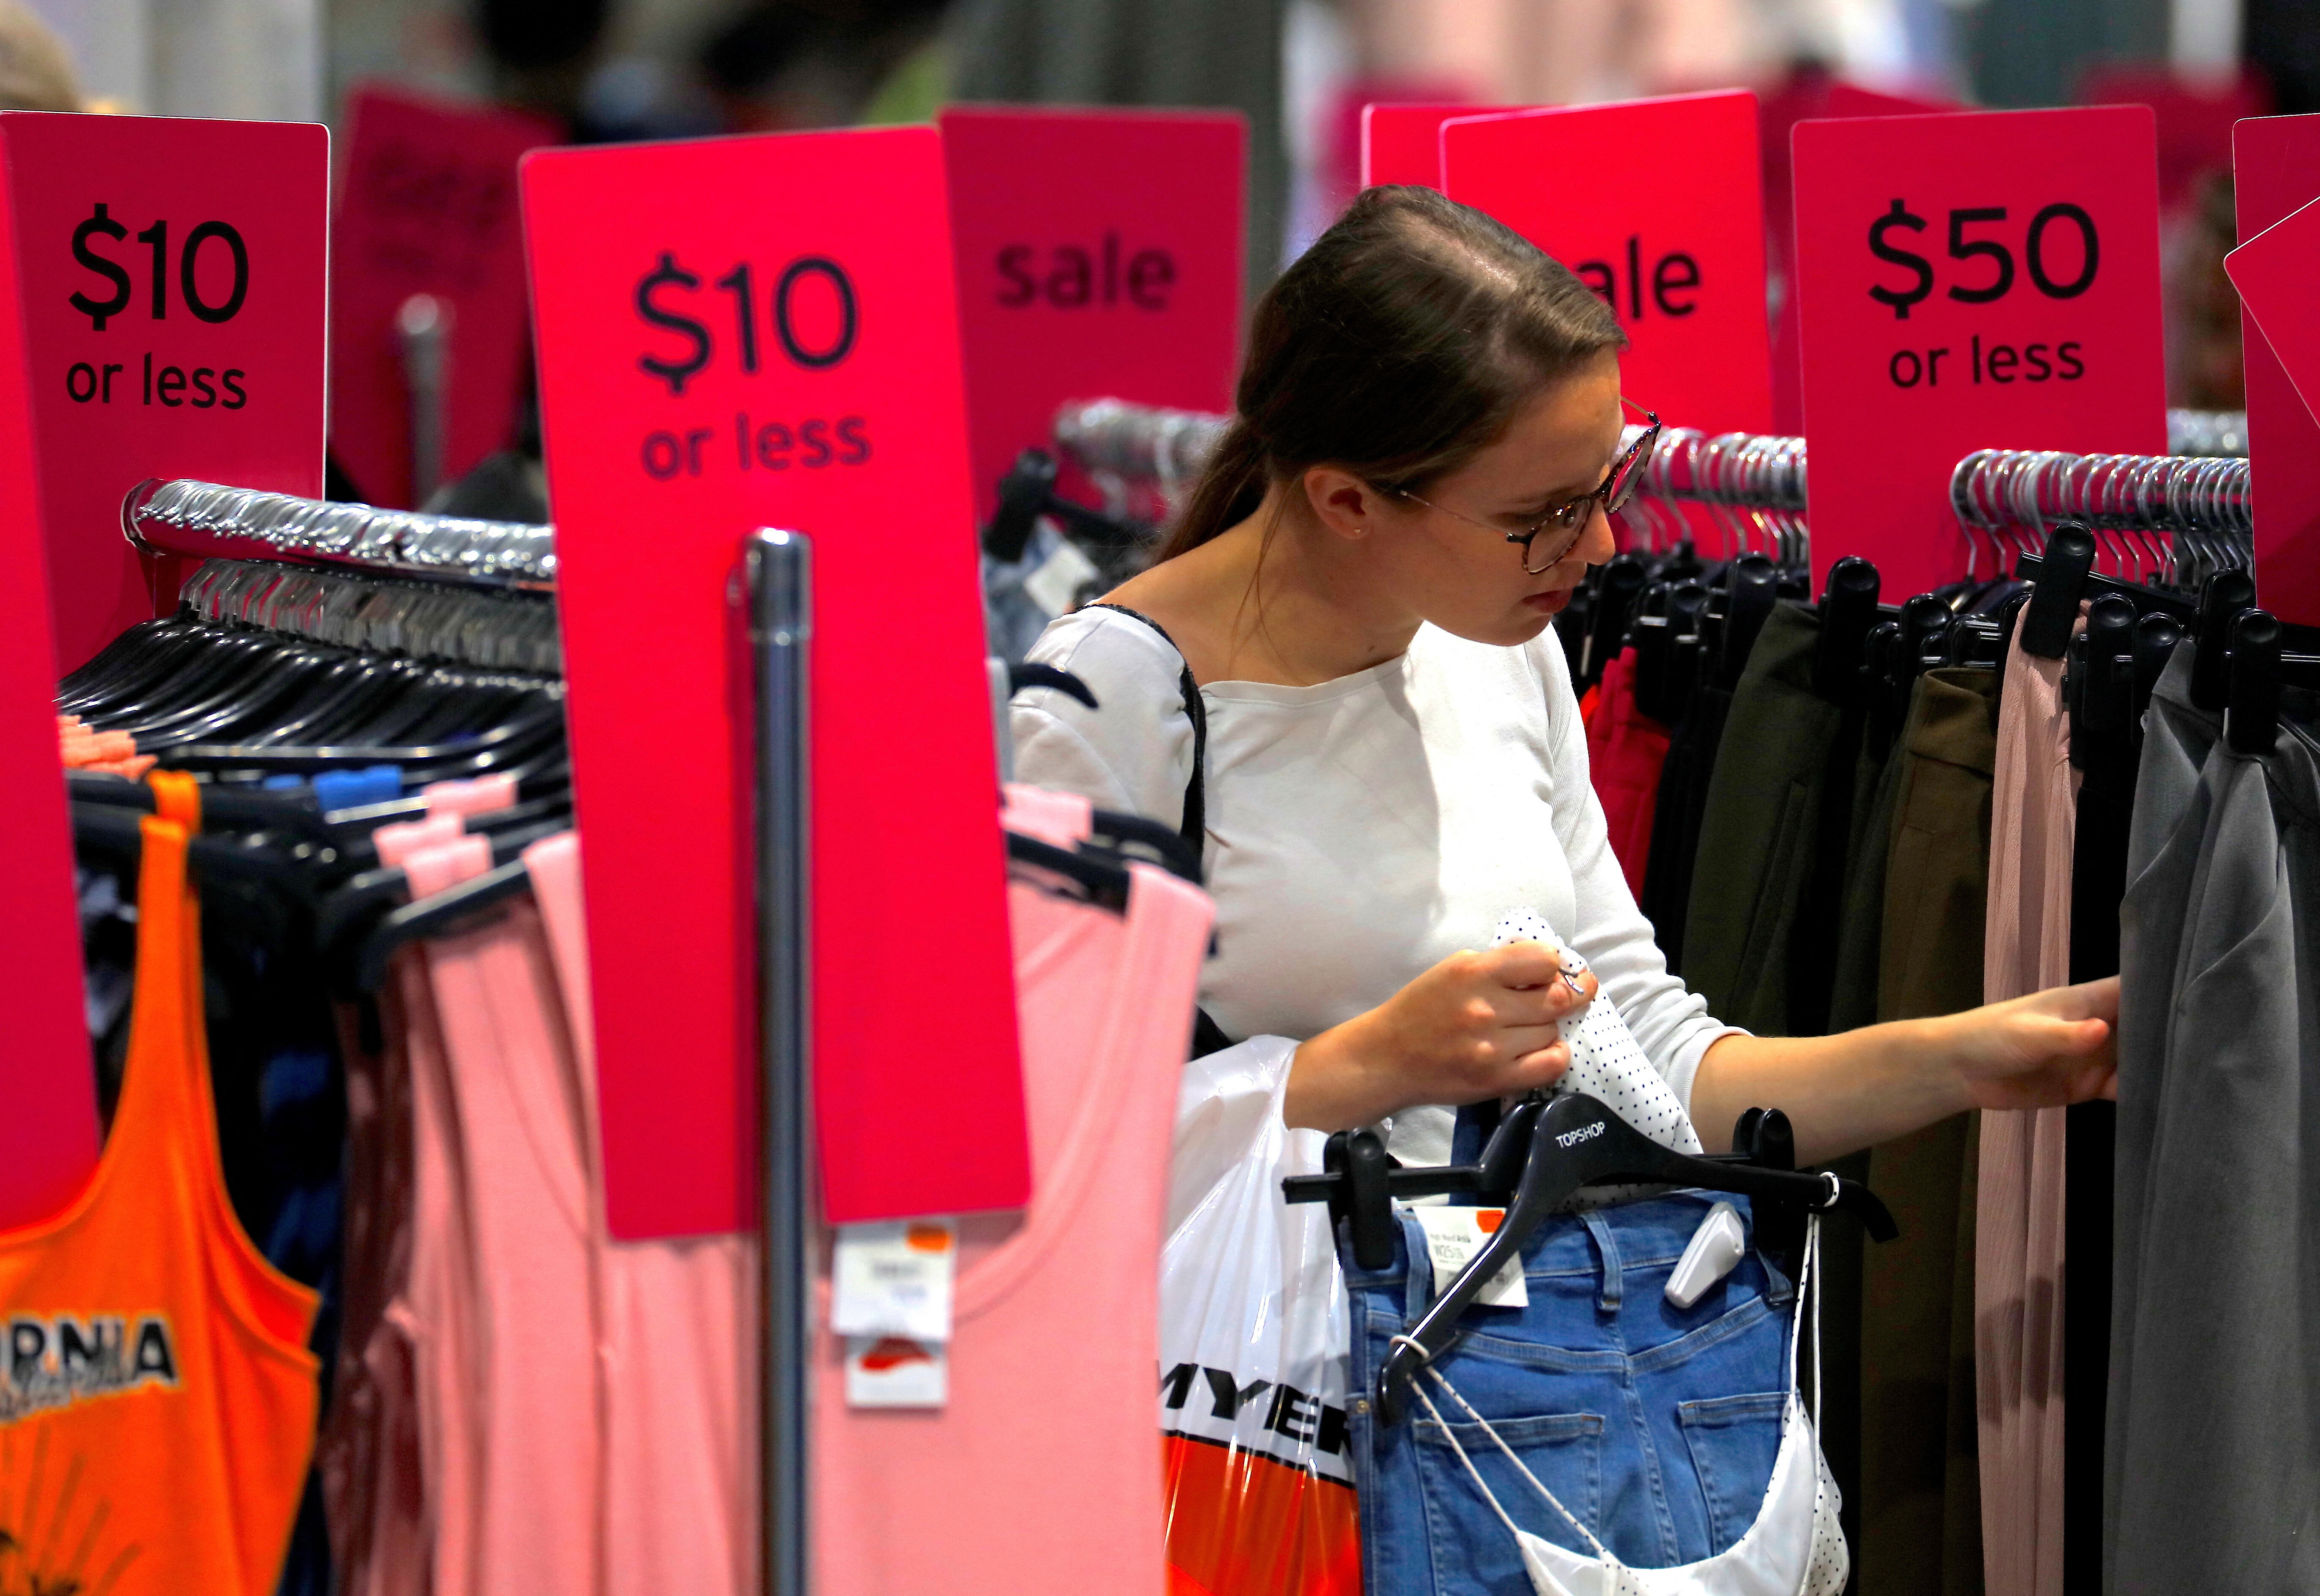 Business Valuations For Clothing and Retail Stores Across Australia